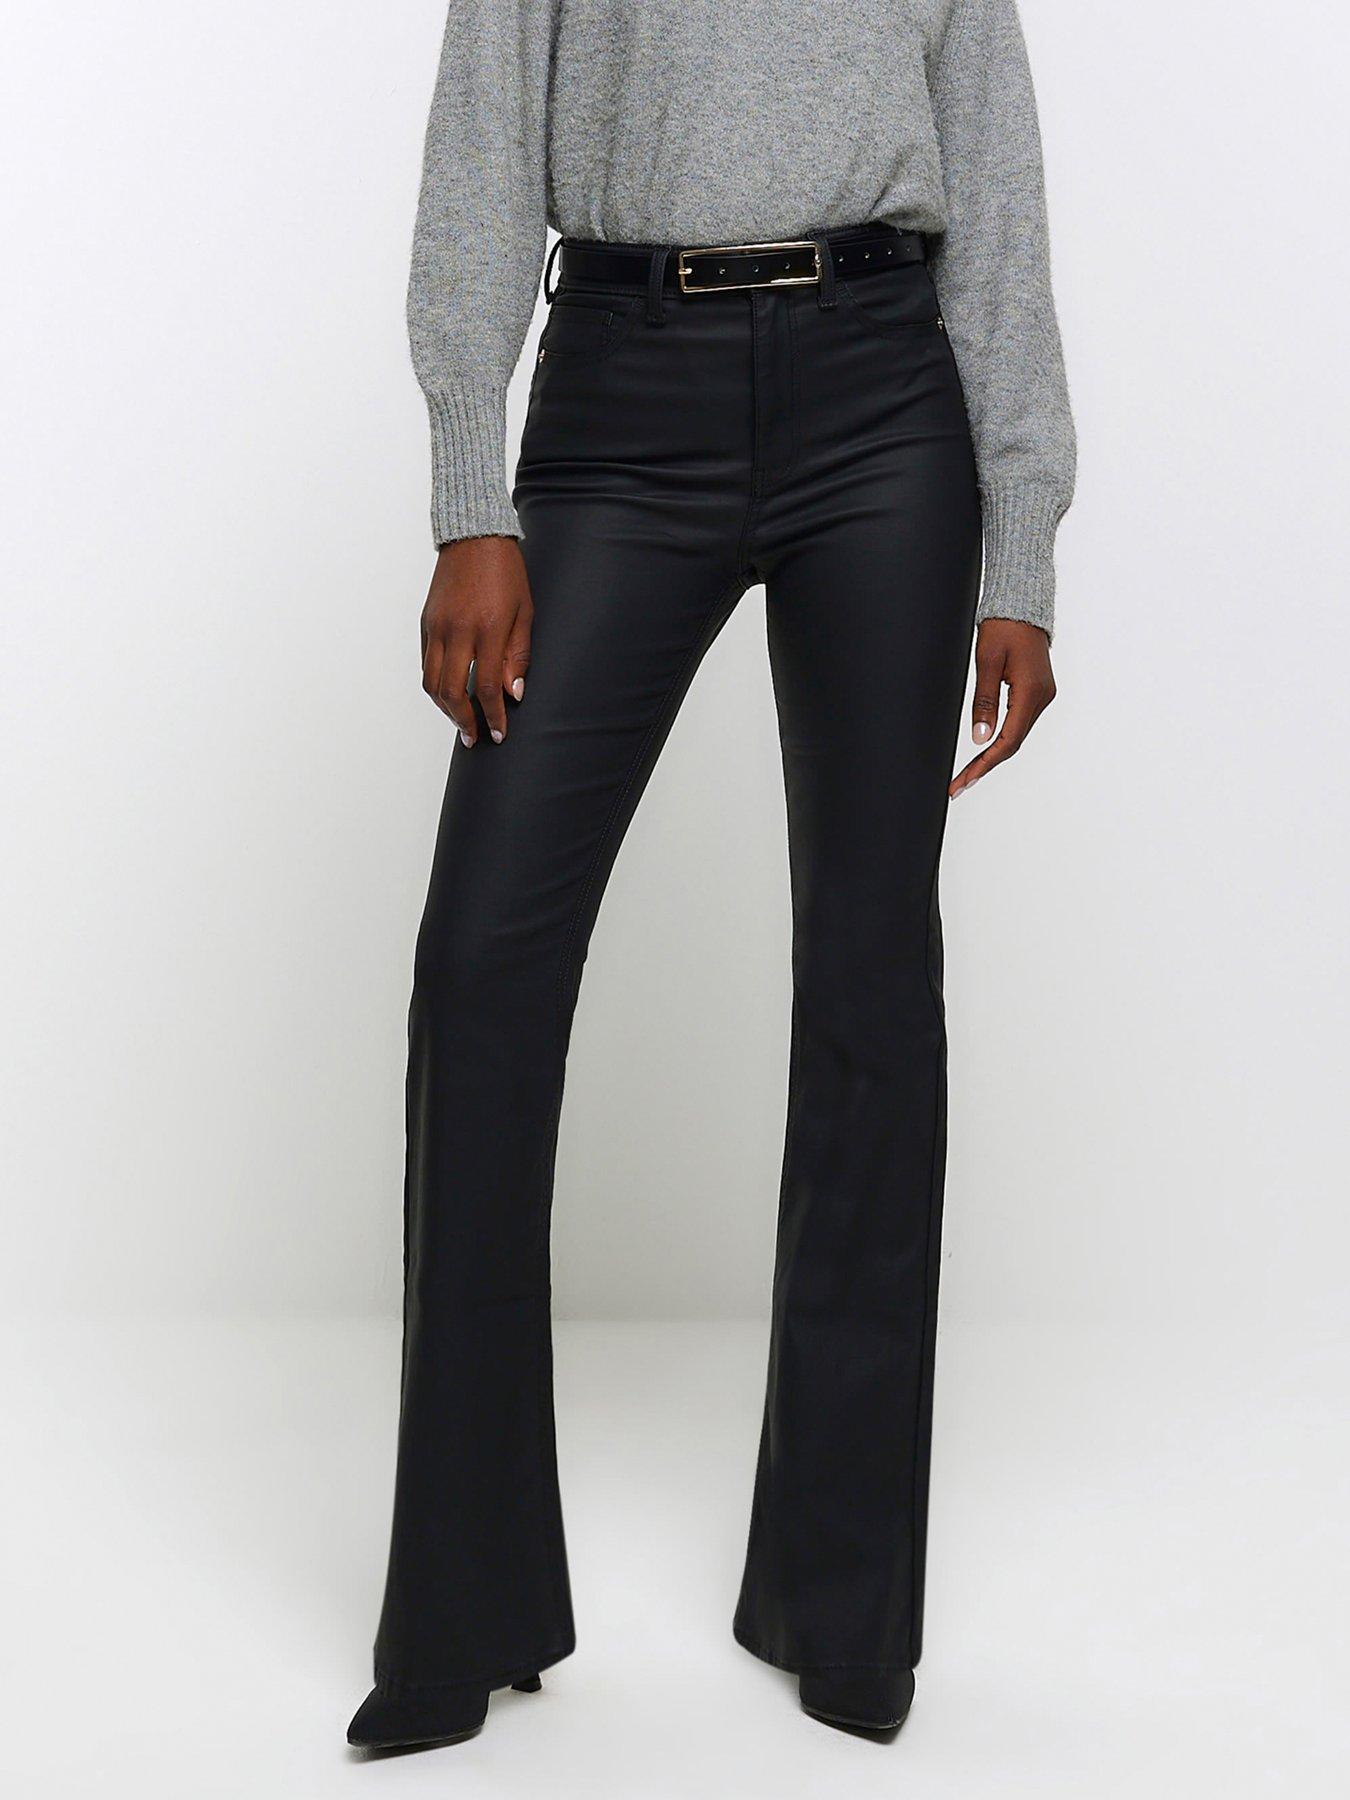 Fold jazz flared trousers in cotton, black, Only Play